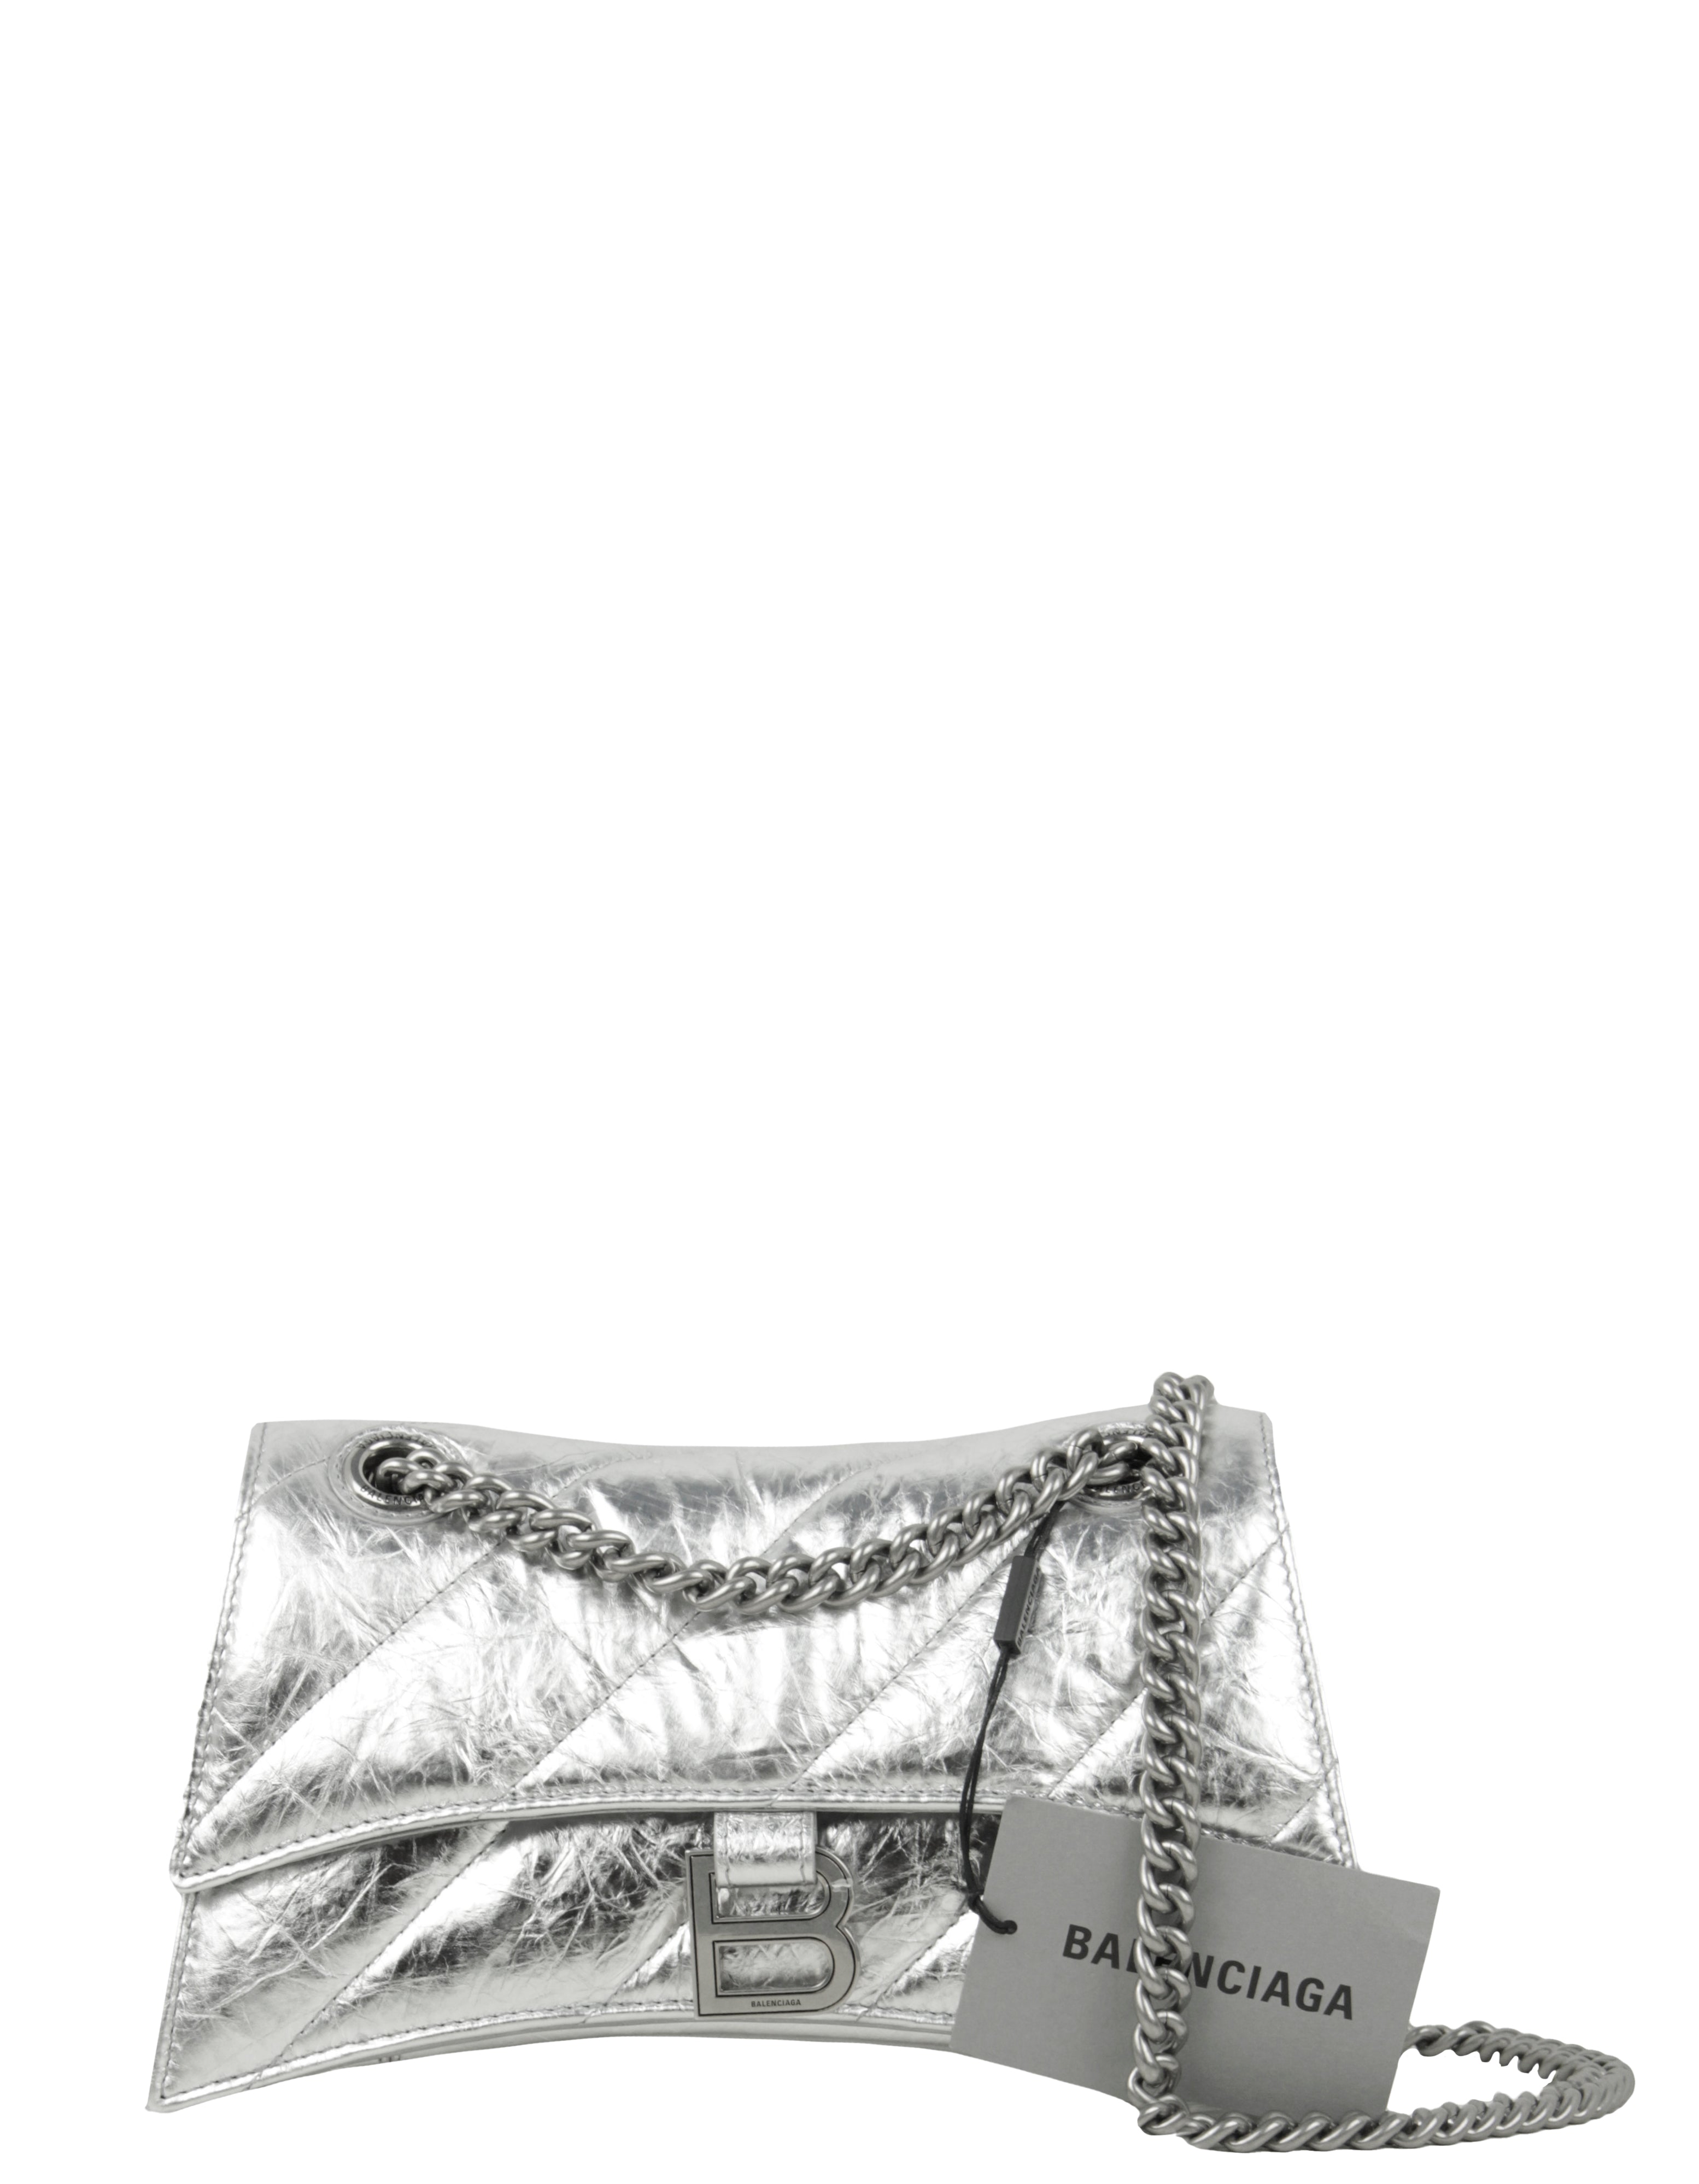 Balenciaga NWT Silver Crinkled-Leather Small Hourglass Chain Shoulder bag